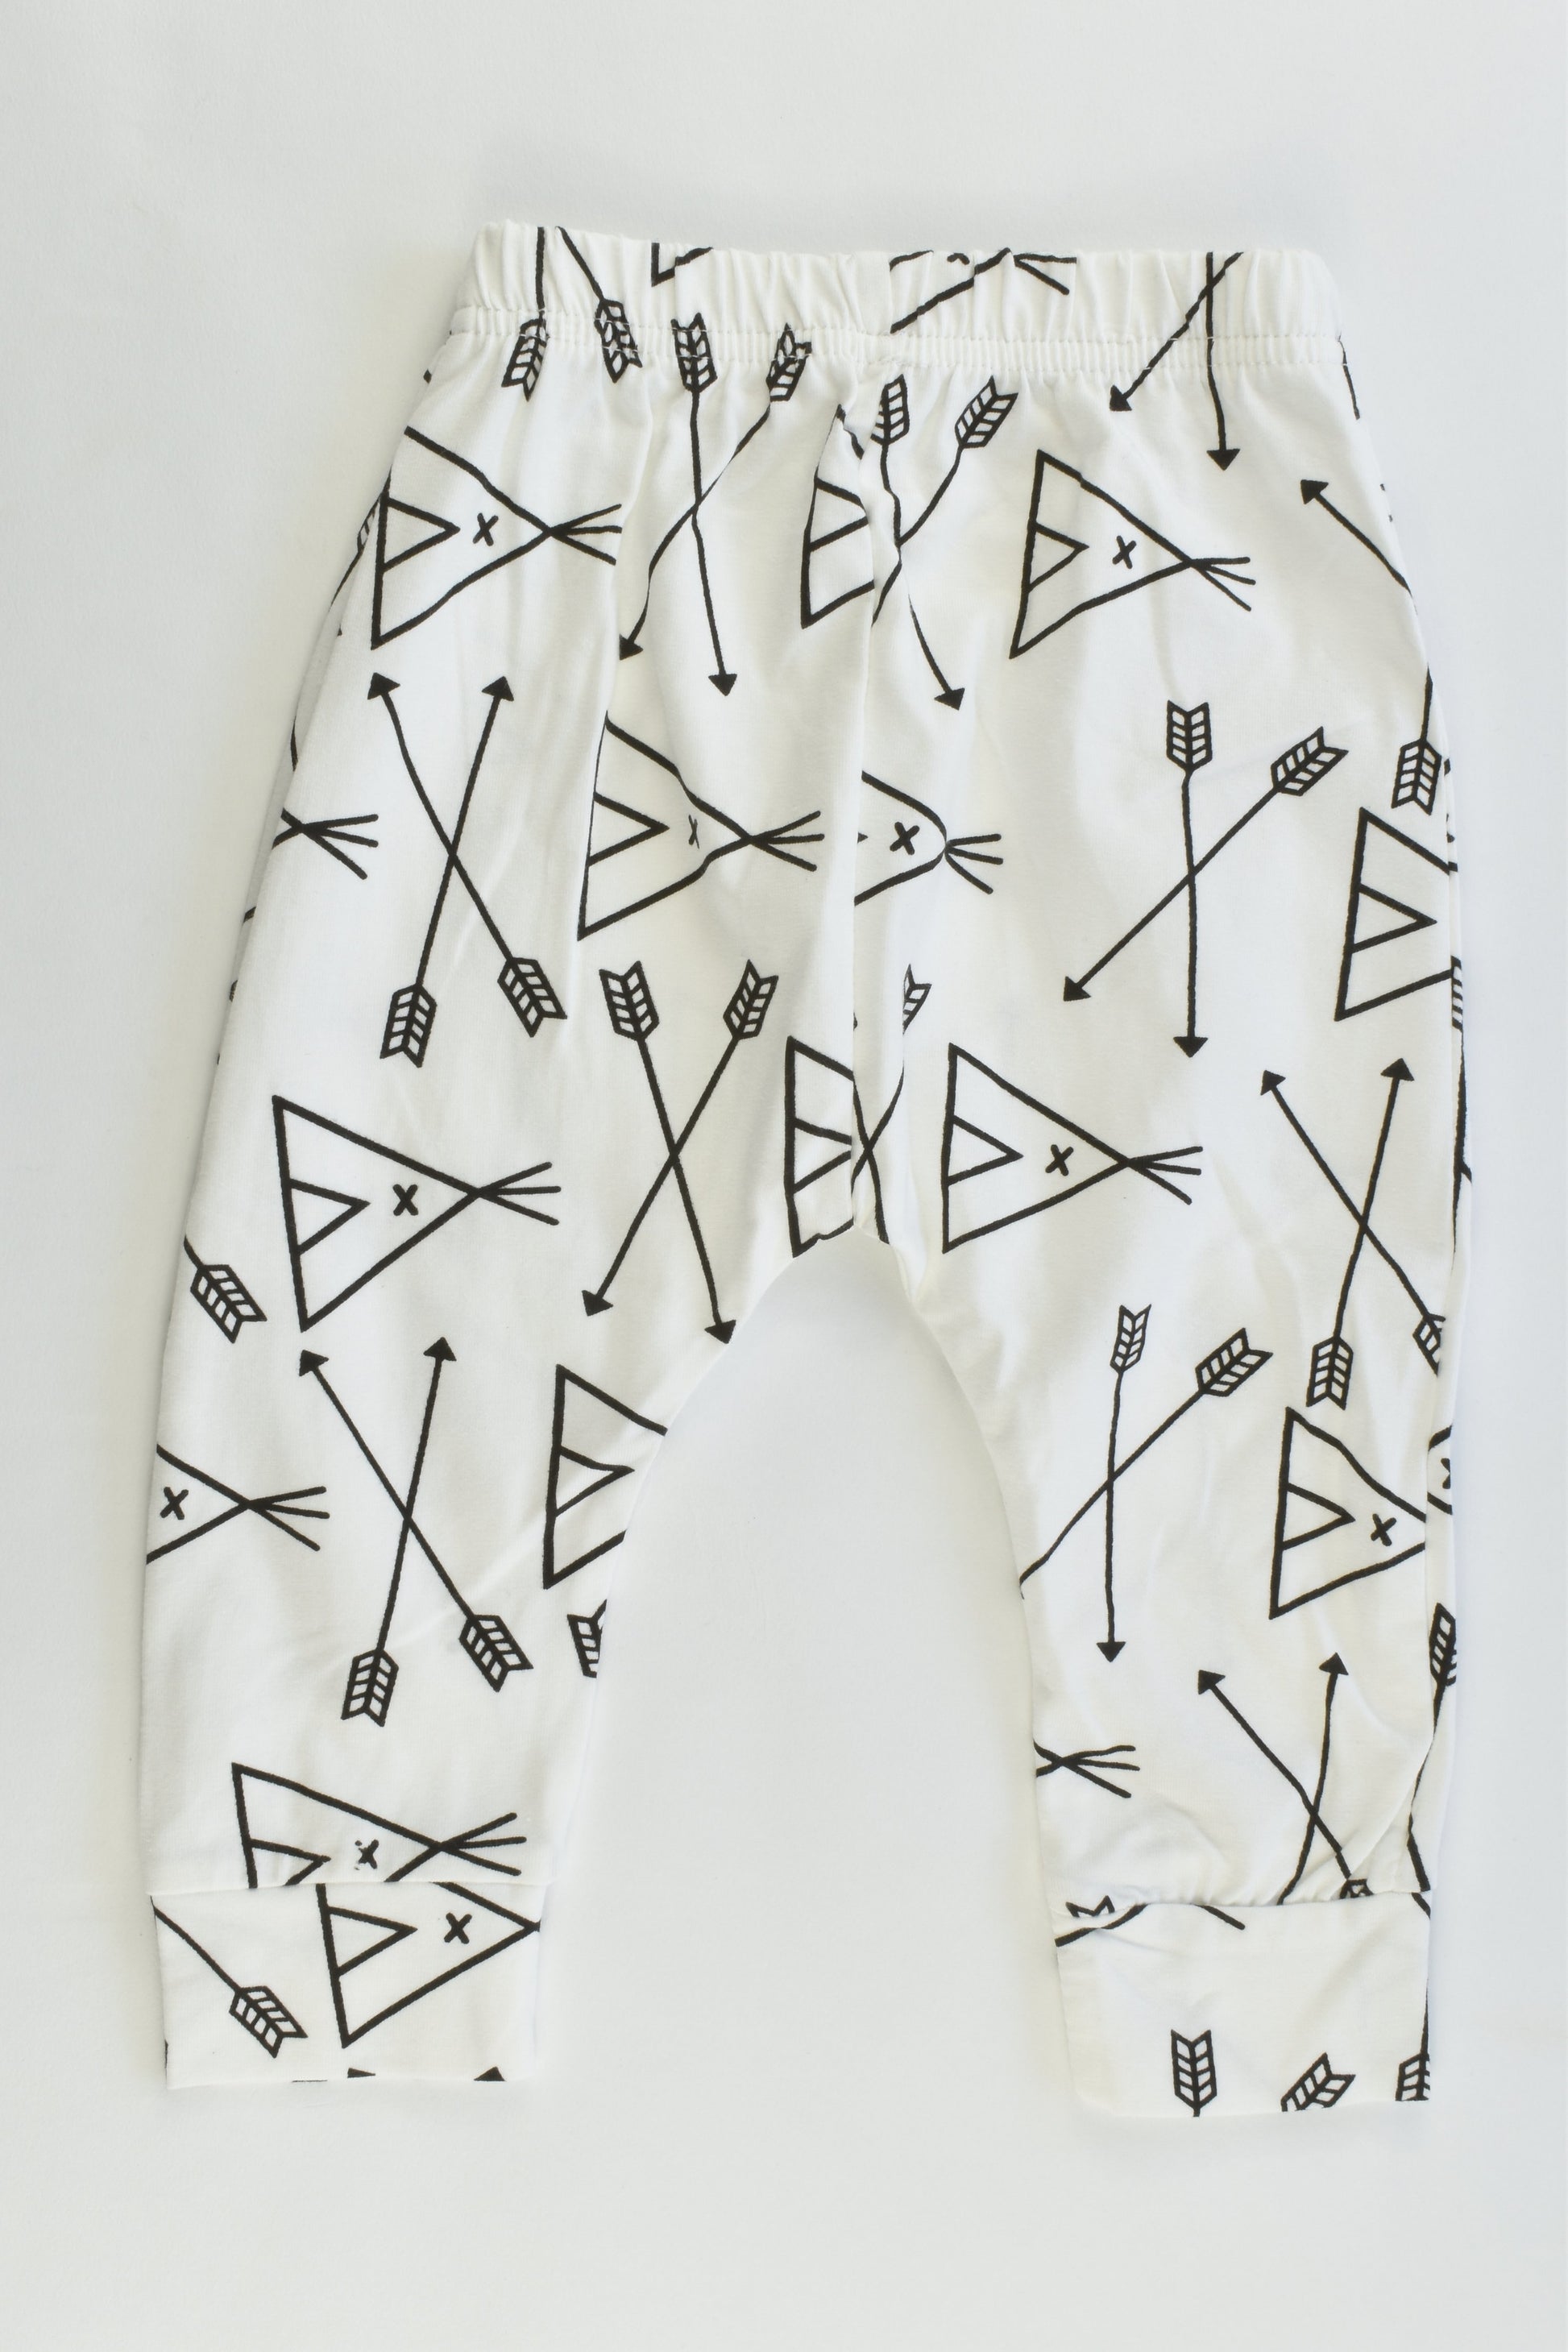 NEW Brand Unknown Size 70 cm (00-0) Teepee Baggy Pants